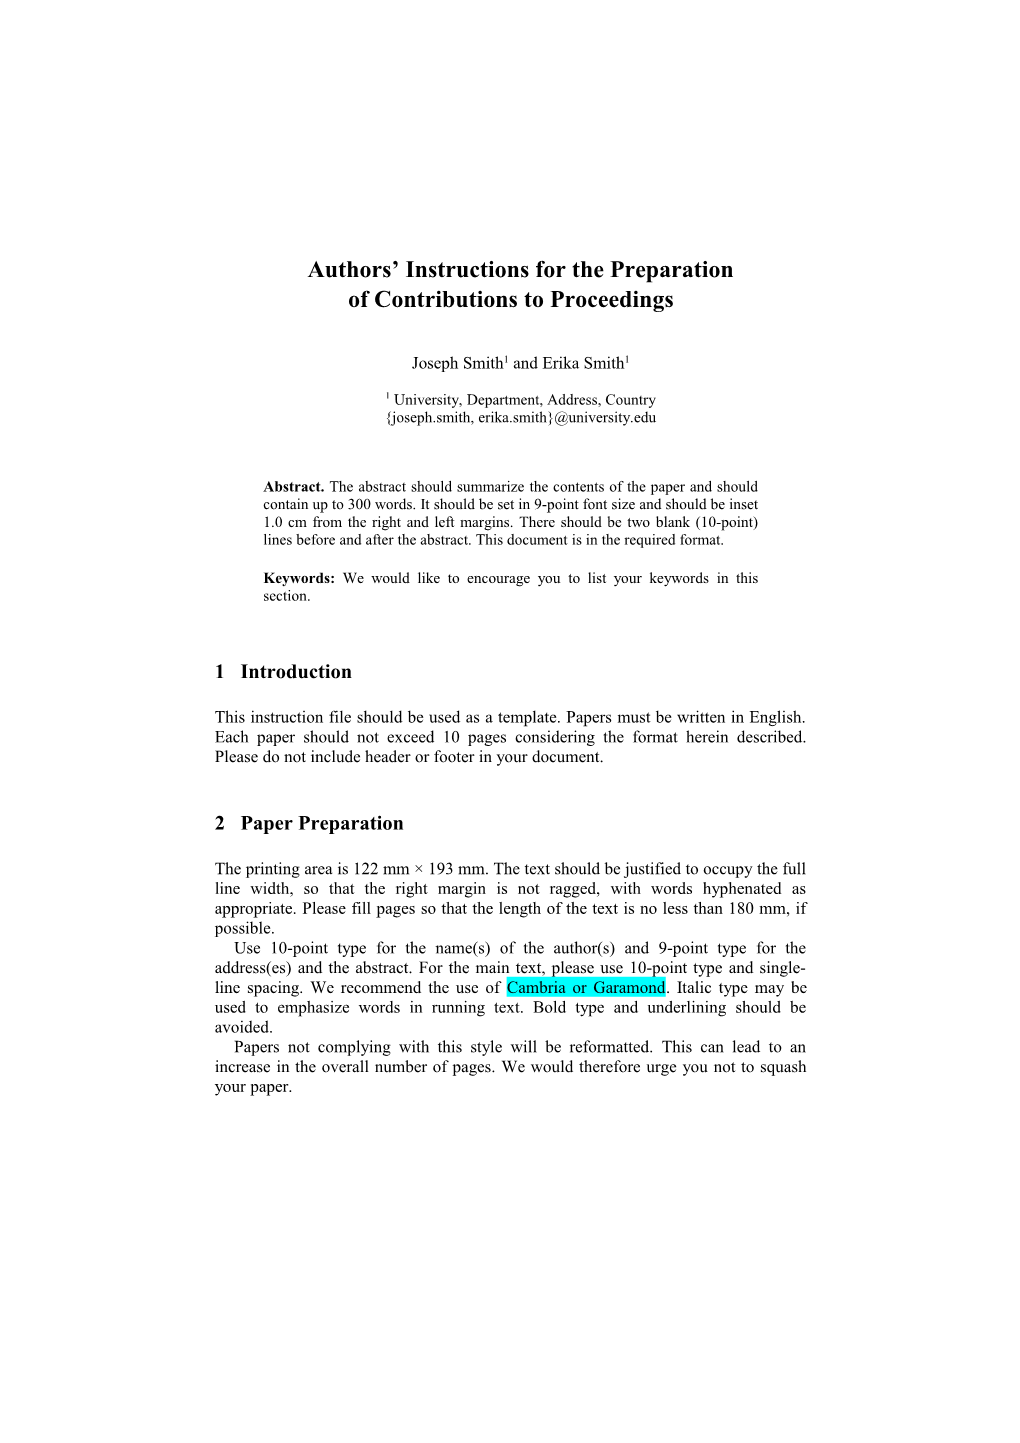 Authors Instructions for the Preparation of Contributions to Proceedings